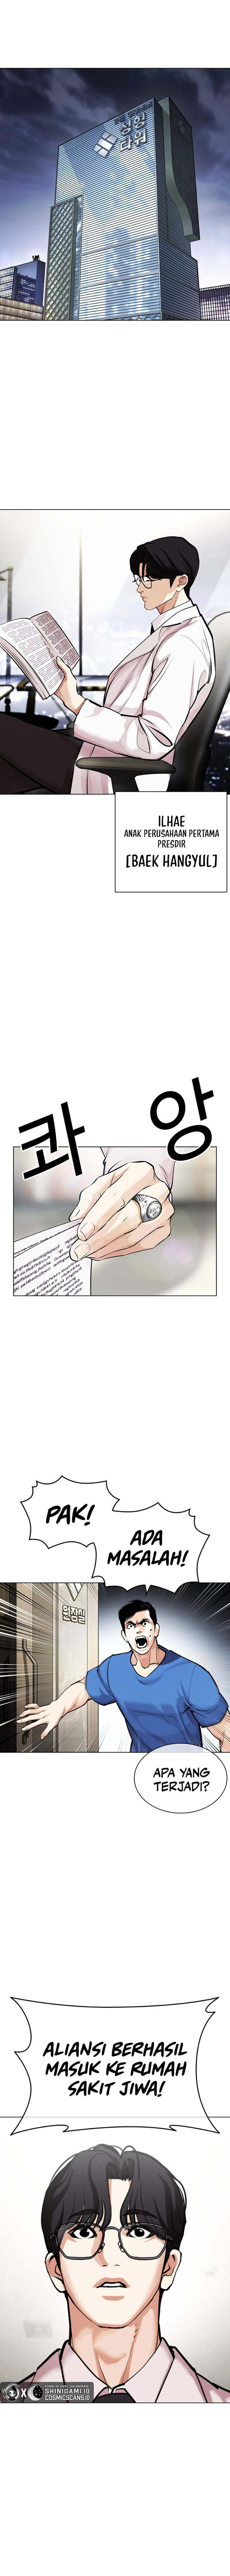 Lookism Chapter 451 Image 1